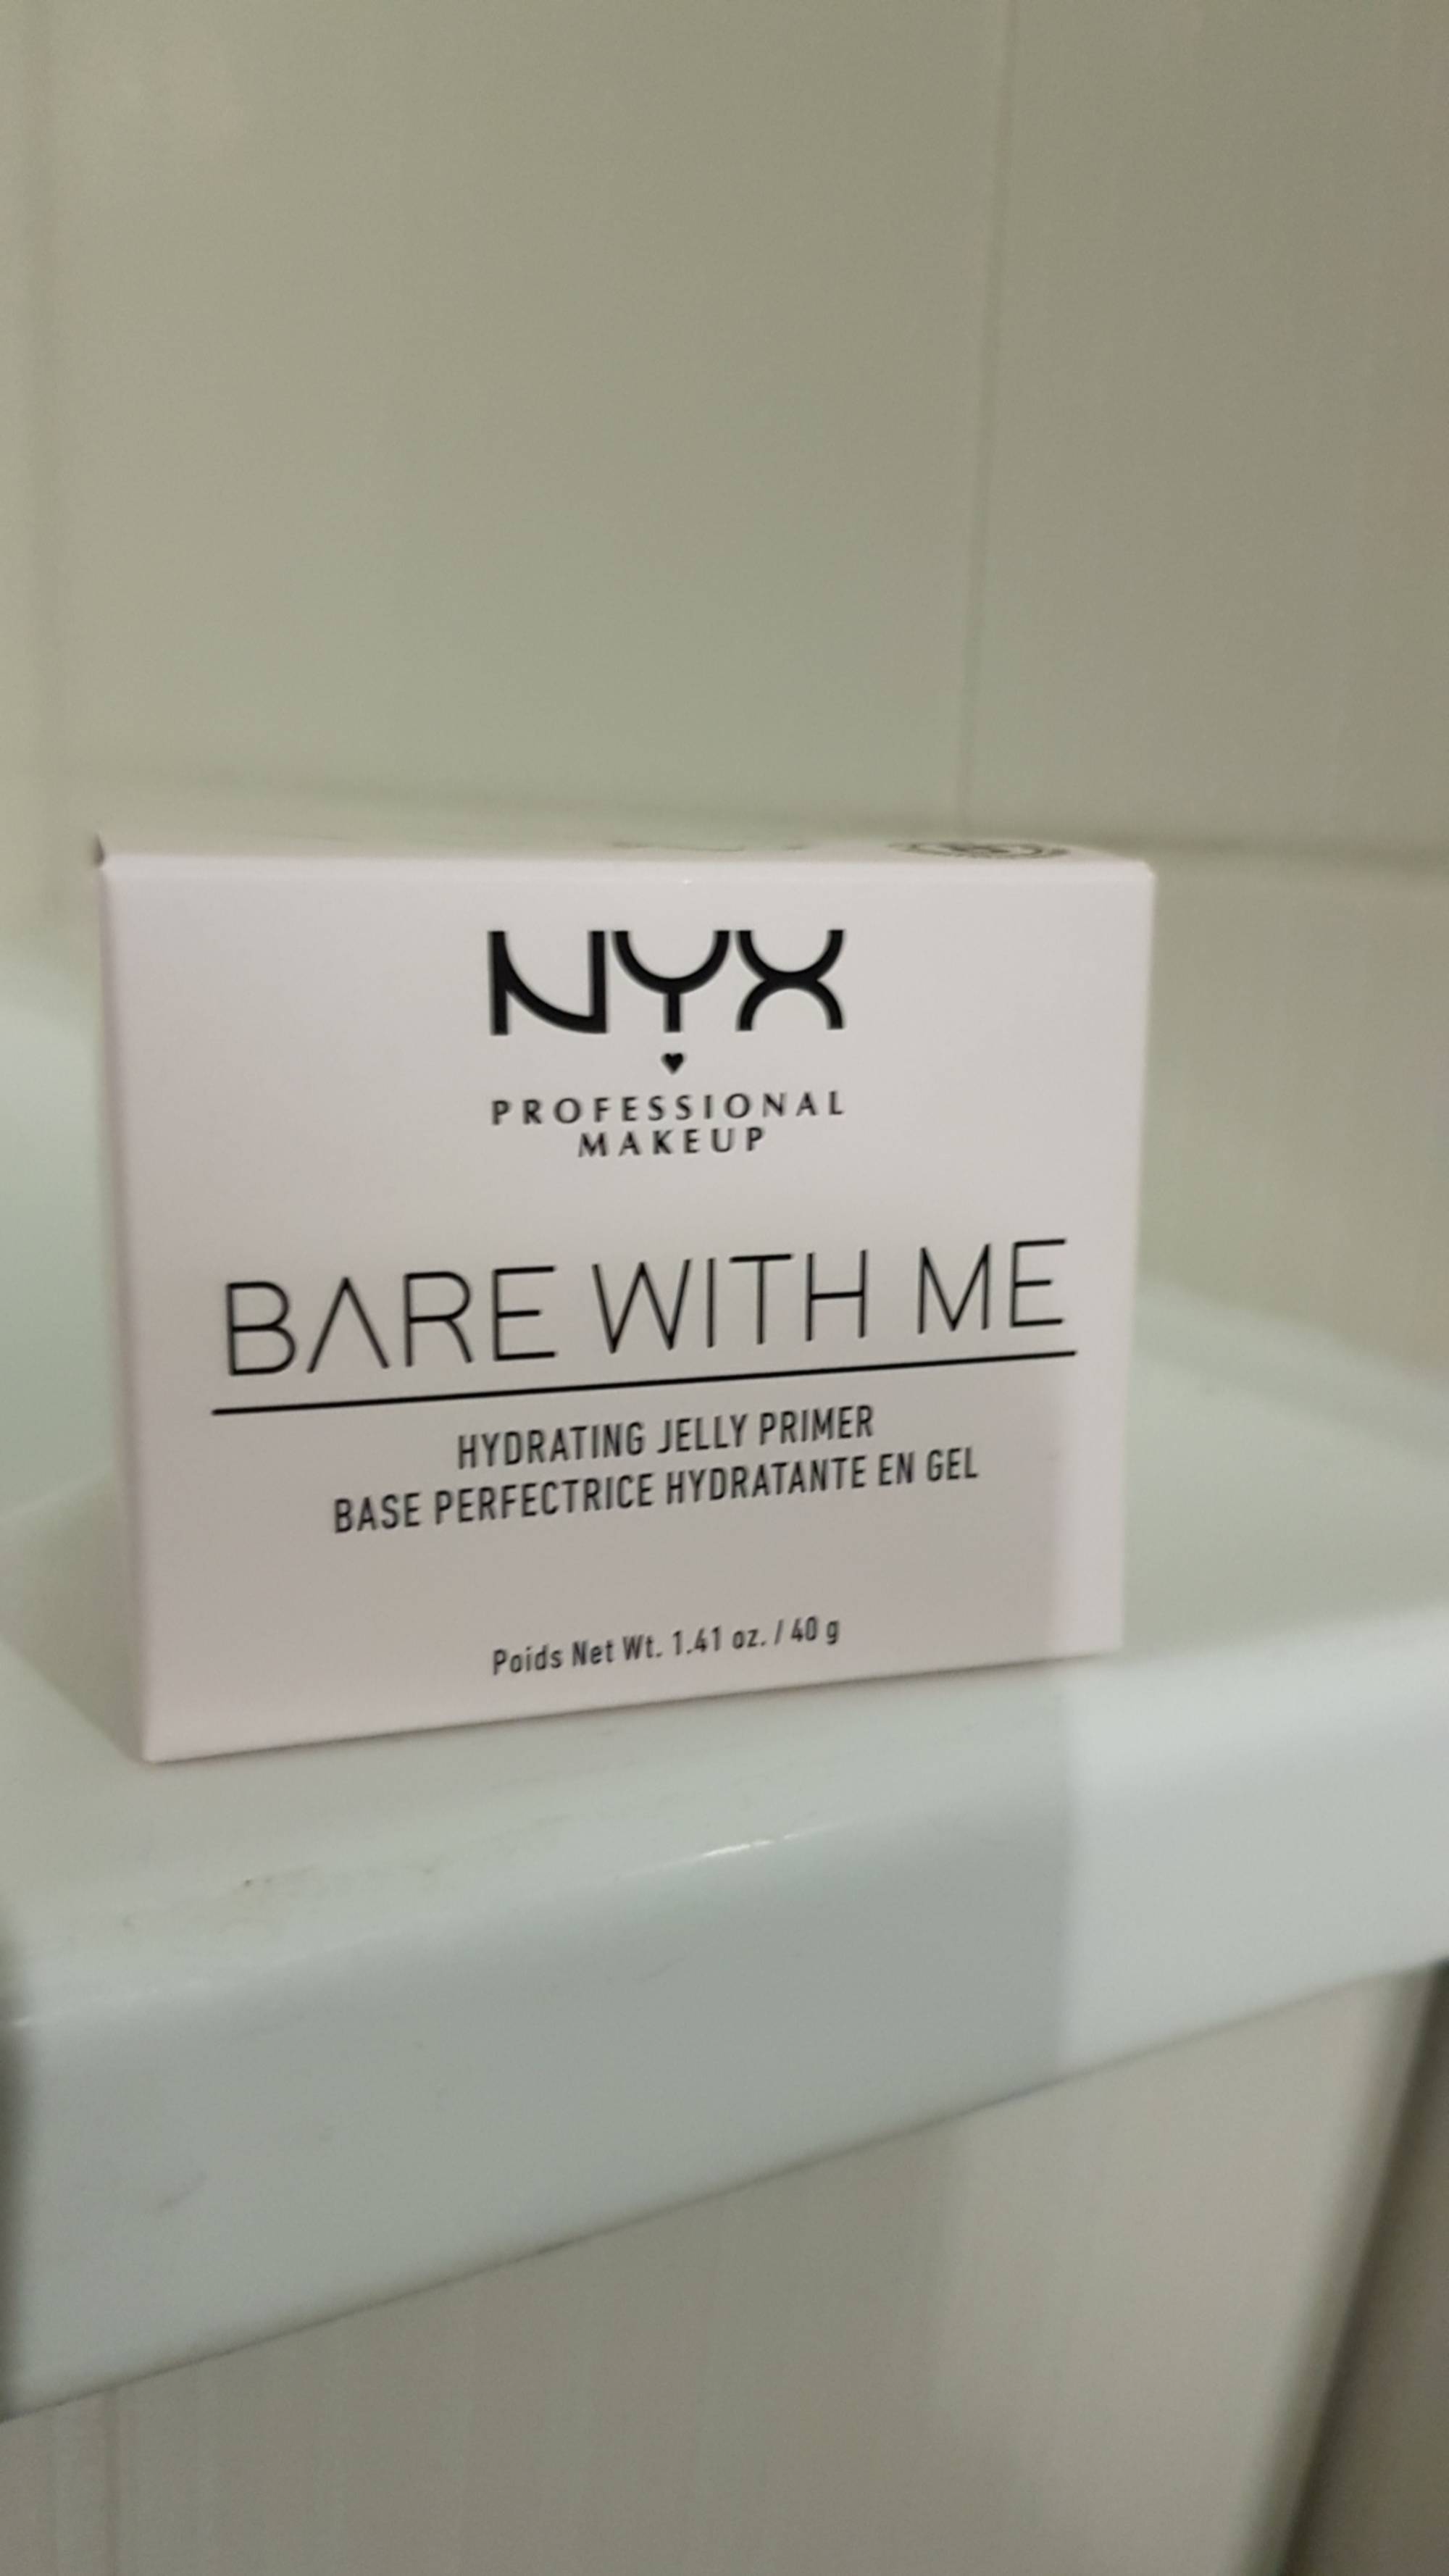 NYX - Bare with me - Base perfectrice hydratante en gel